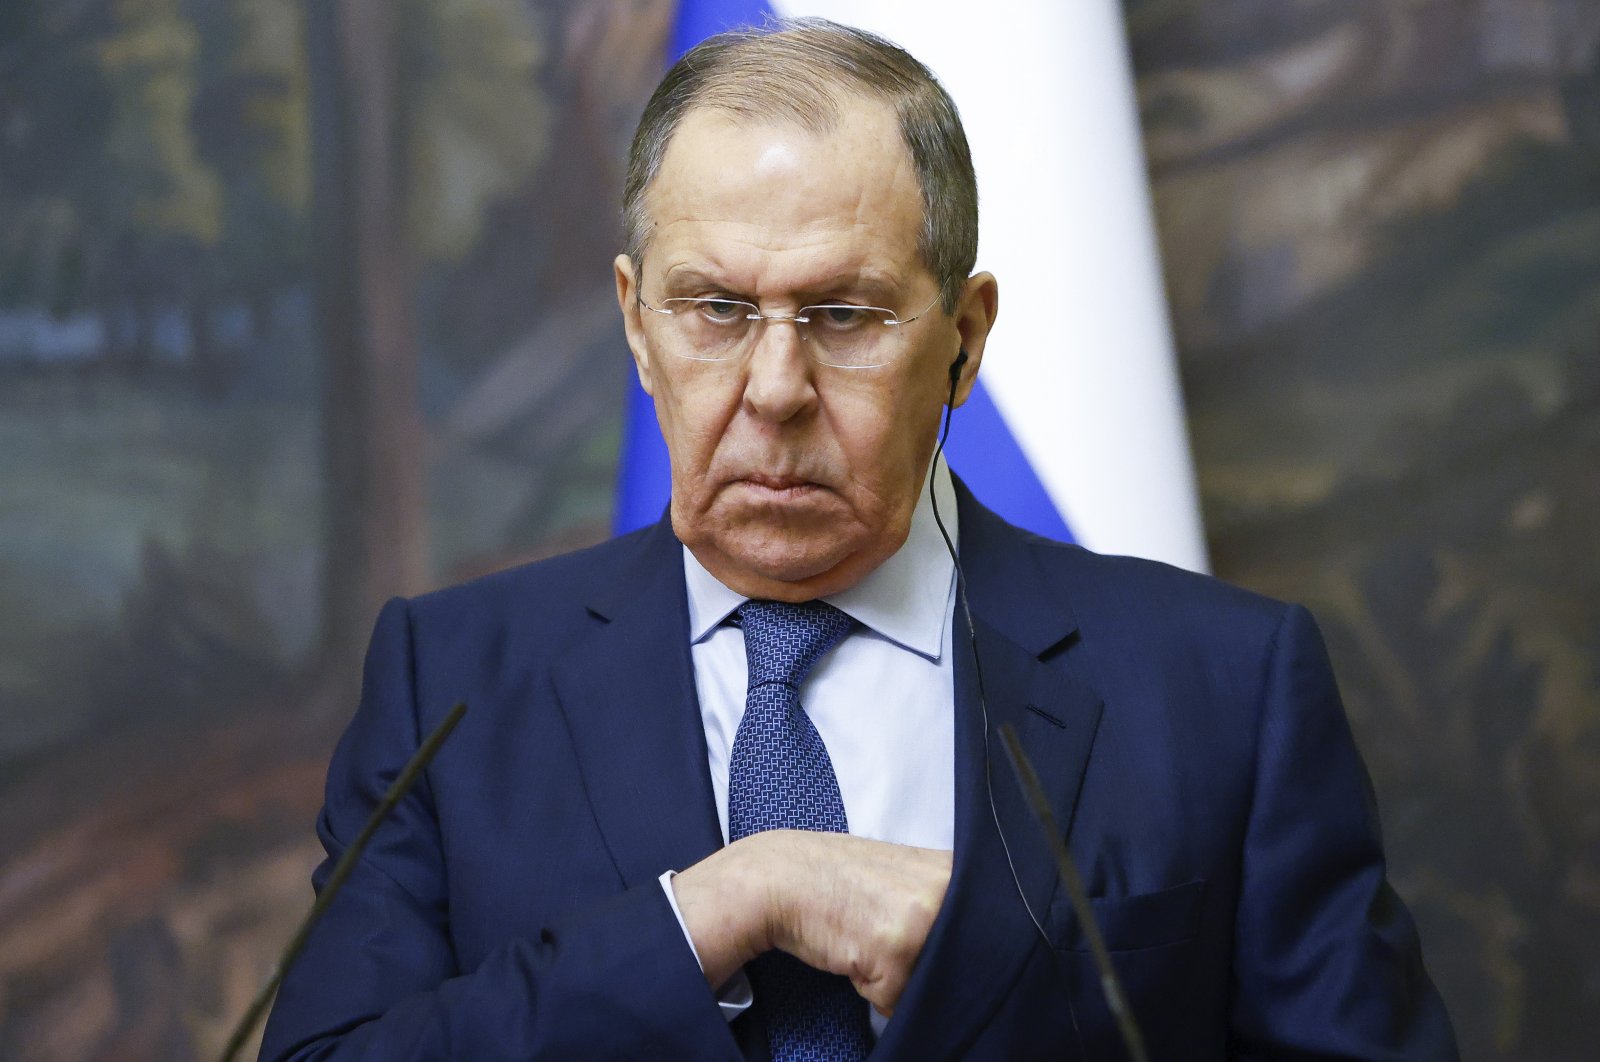 Russian Foreign Minister Sergey Lavrov attends a joint news conference with Greek Foreign Minister Nikos Dendias following their talks in Moscow, Russia, Friday, Feb. 18, 2022. (AP Photo)